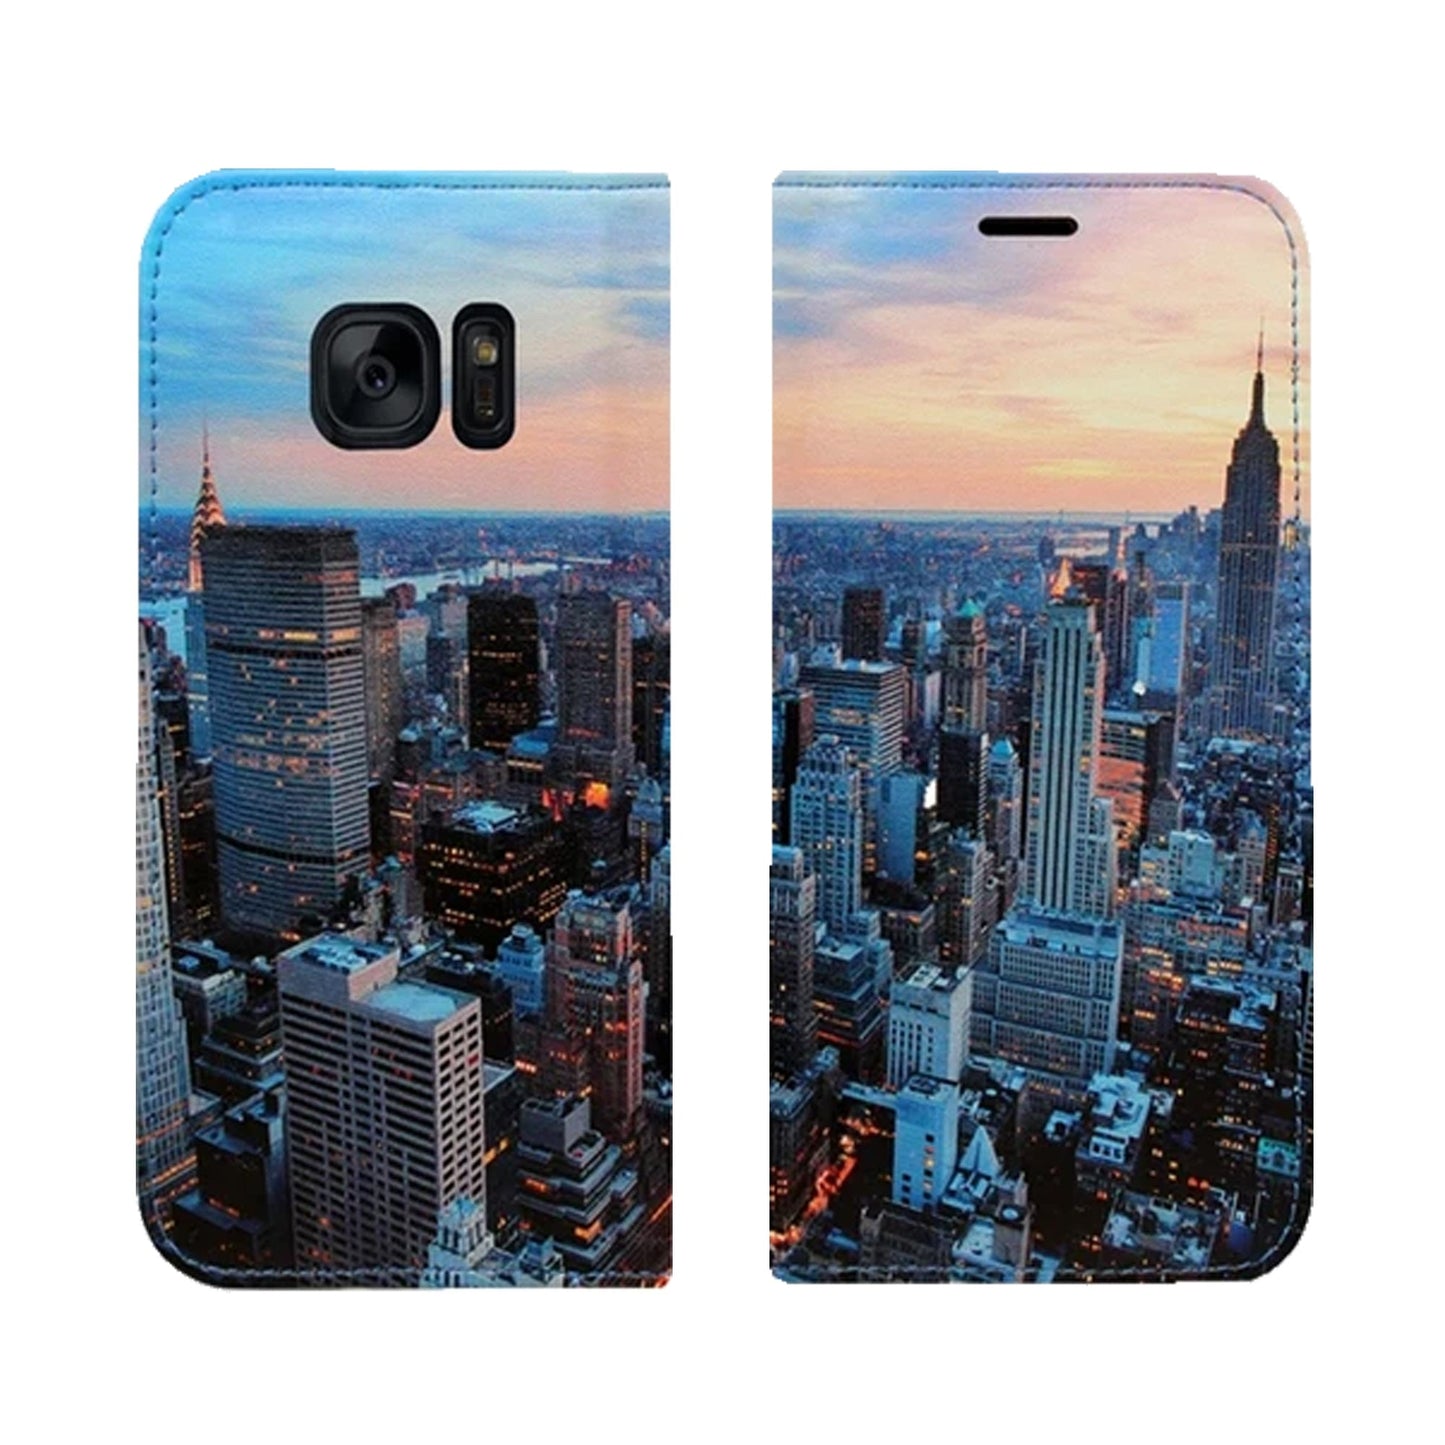 New York City Panoramic Case for Samsung Galaxy S7